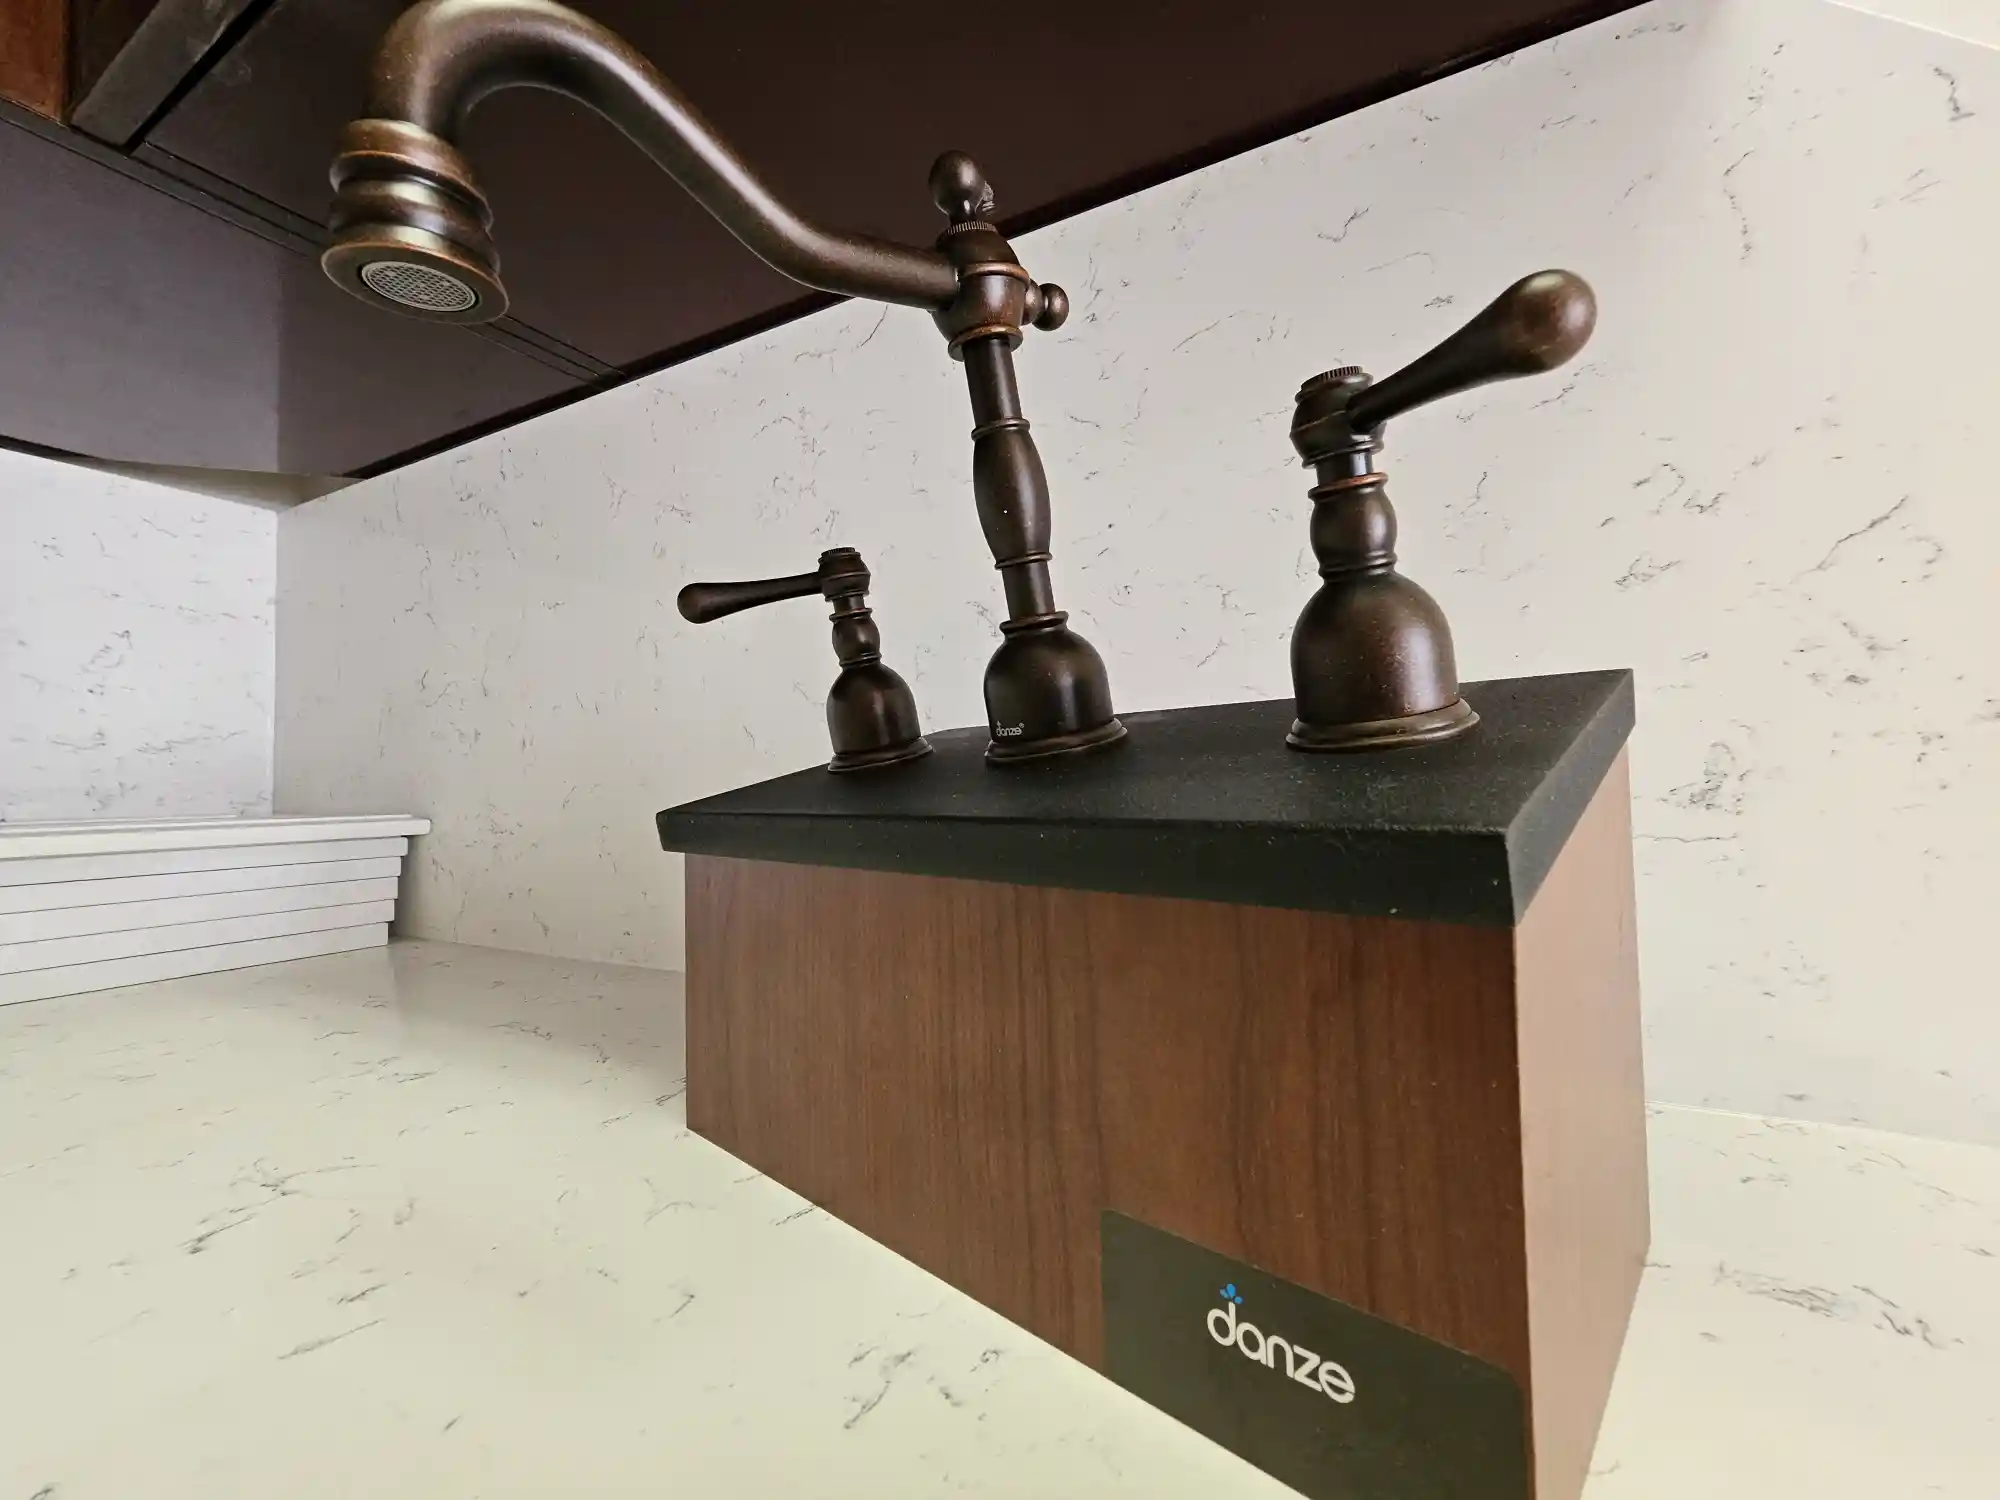 Bronze faucet and handles.